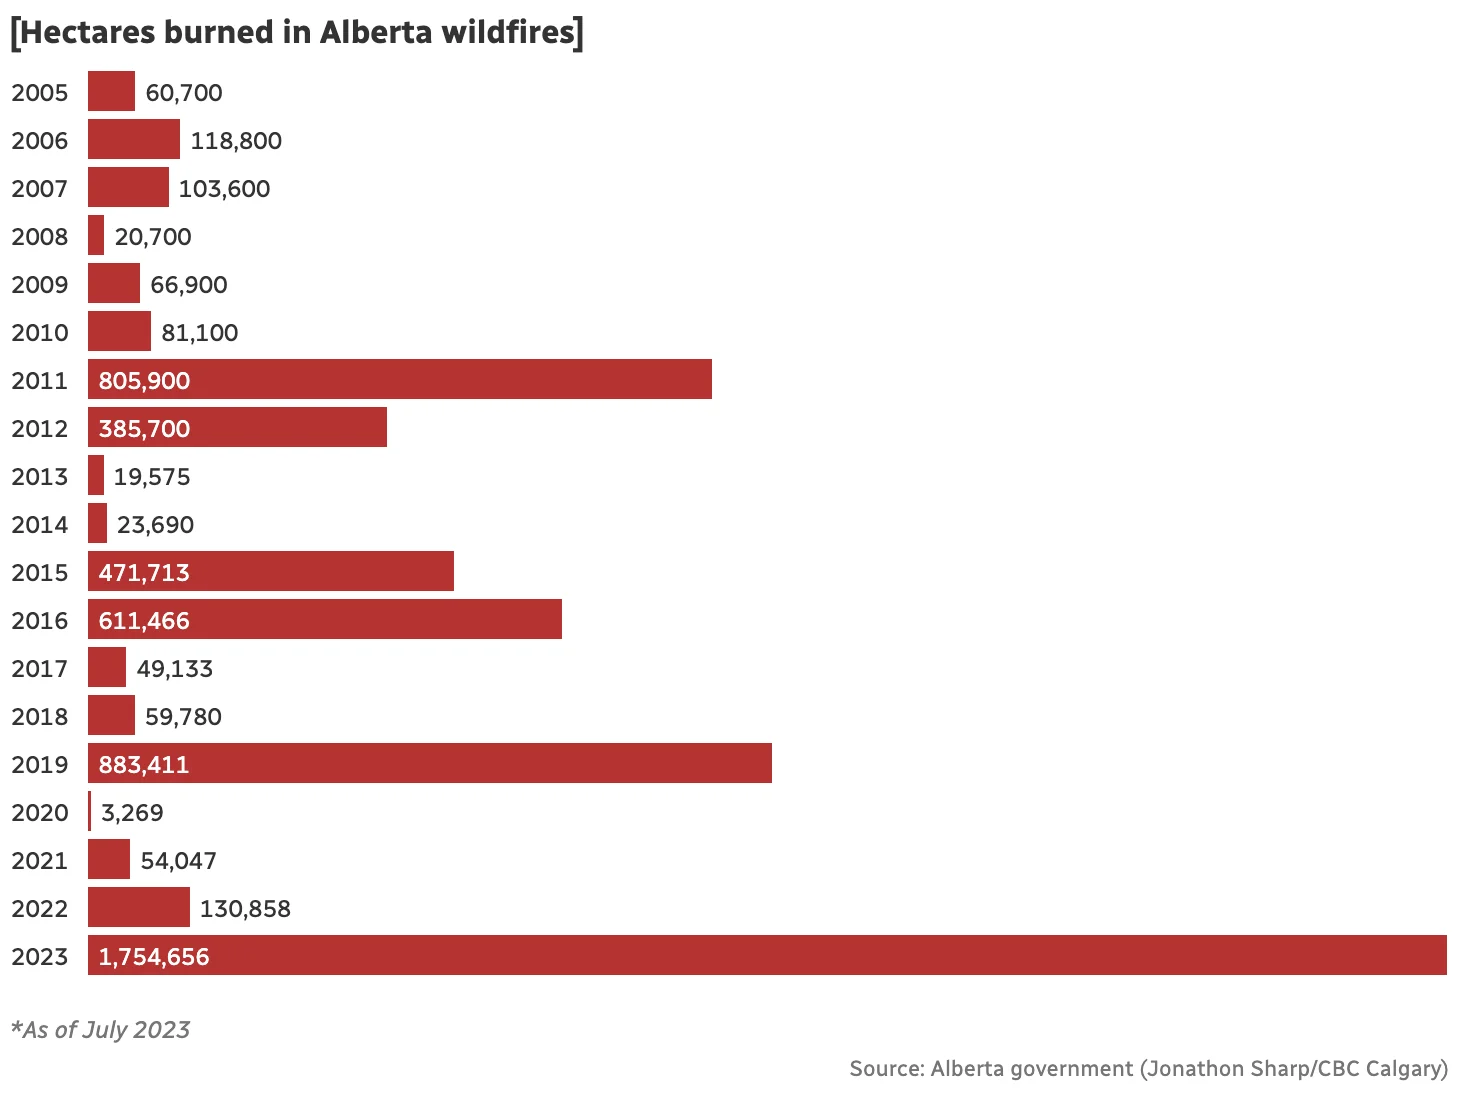 CBC: Hectares burned in Alberta wildfires 2023